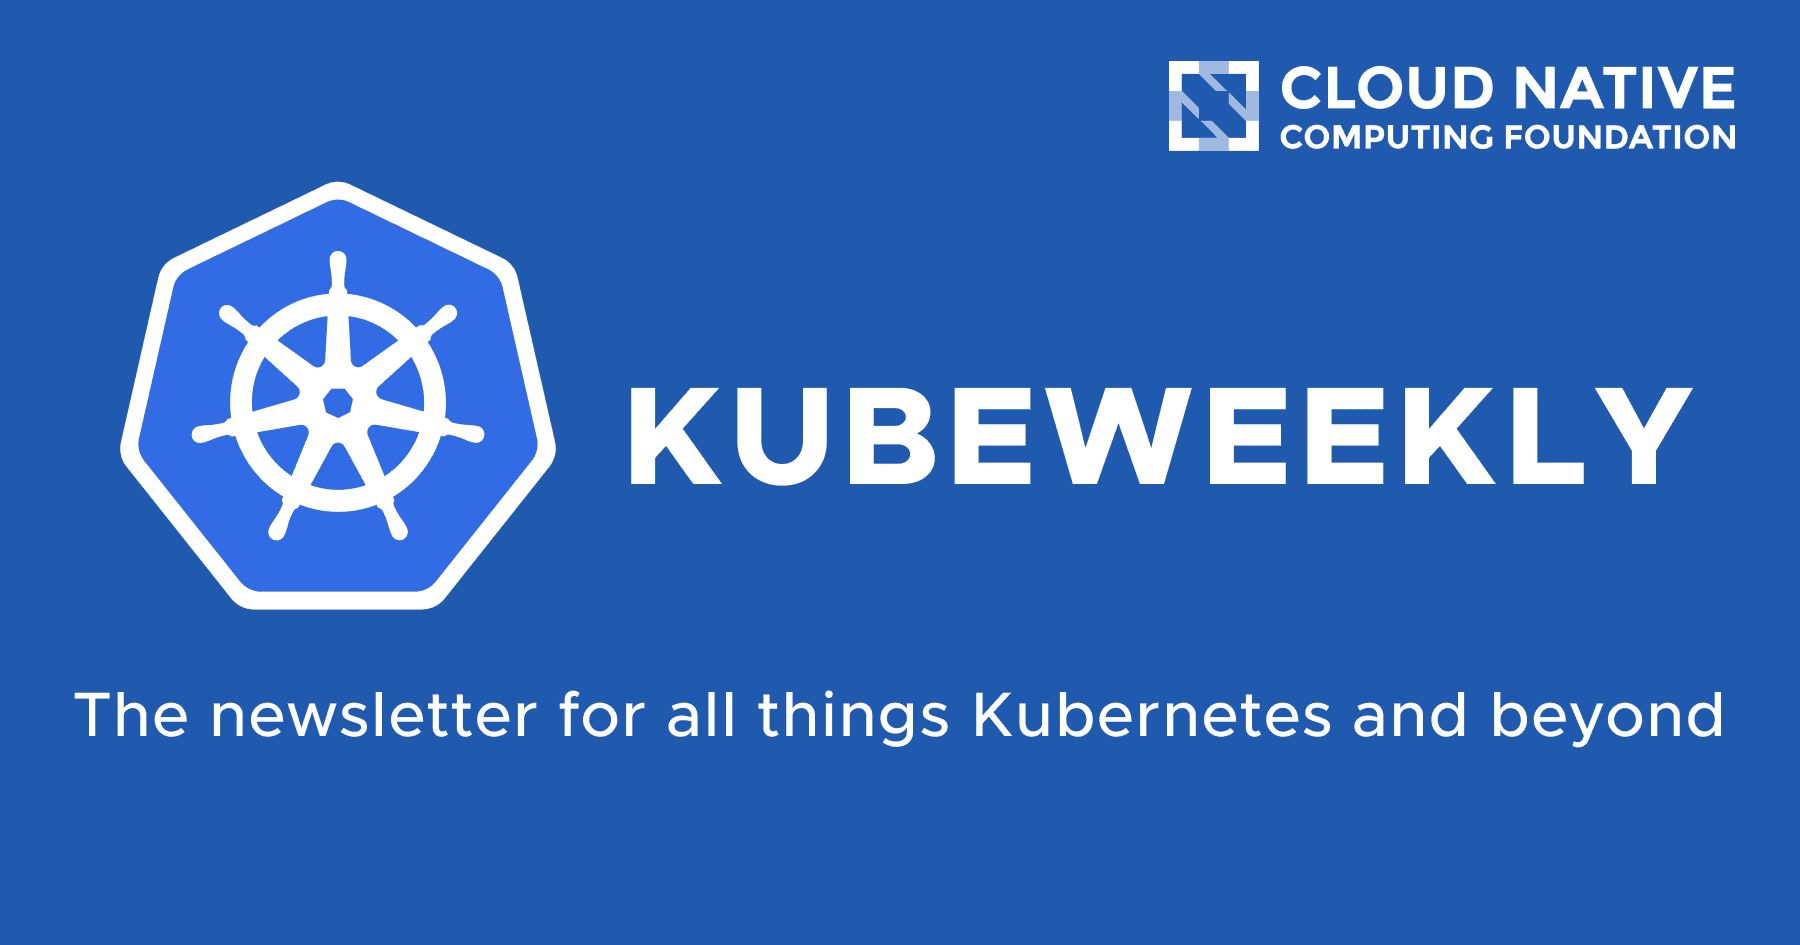 KubeWeekly - The newsletter for all things Kubernetes and beyond

